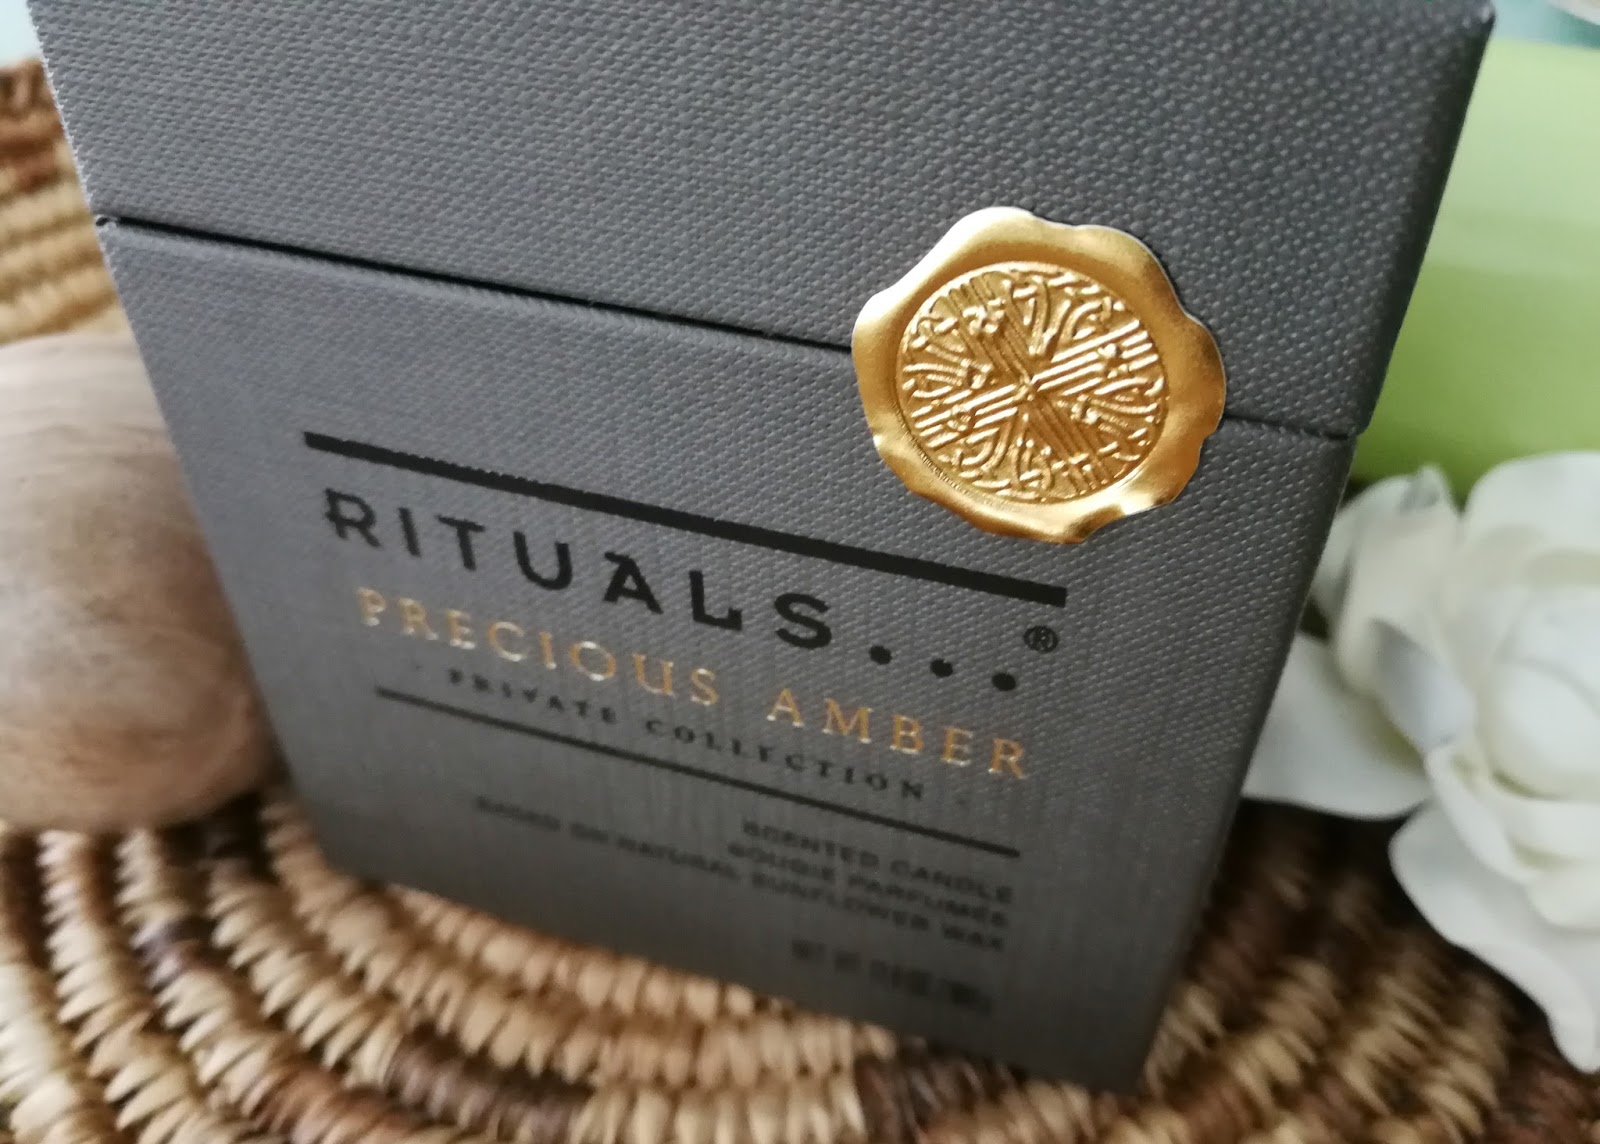 Rituals Precious Amber Duftkerze - Slow down and enjoy - FLYINGHOUSEWIVES